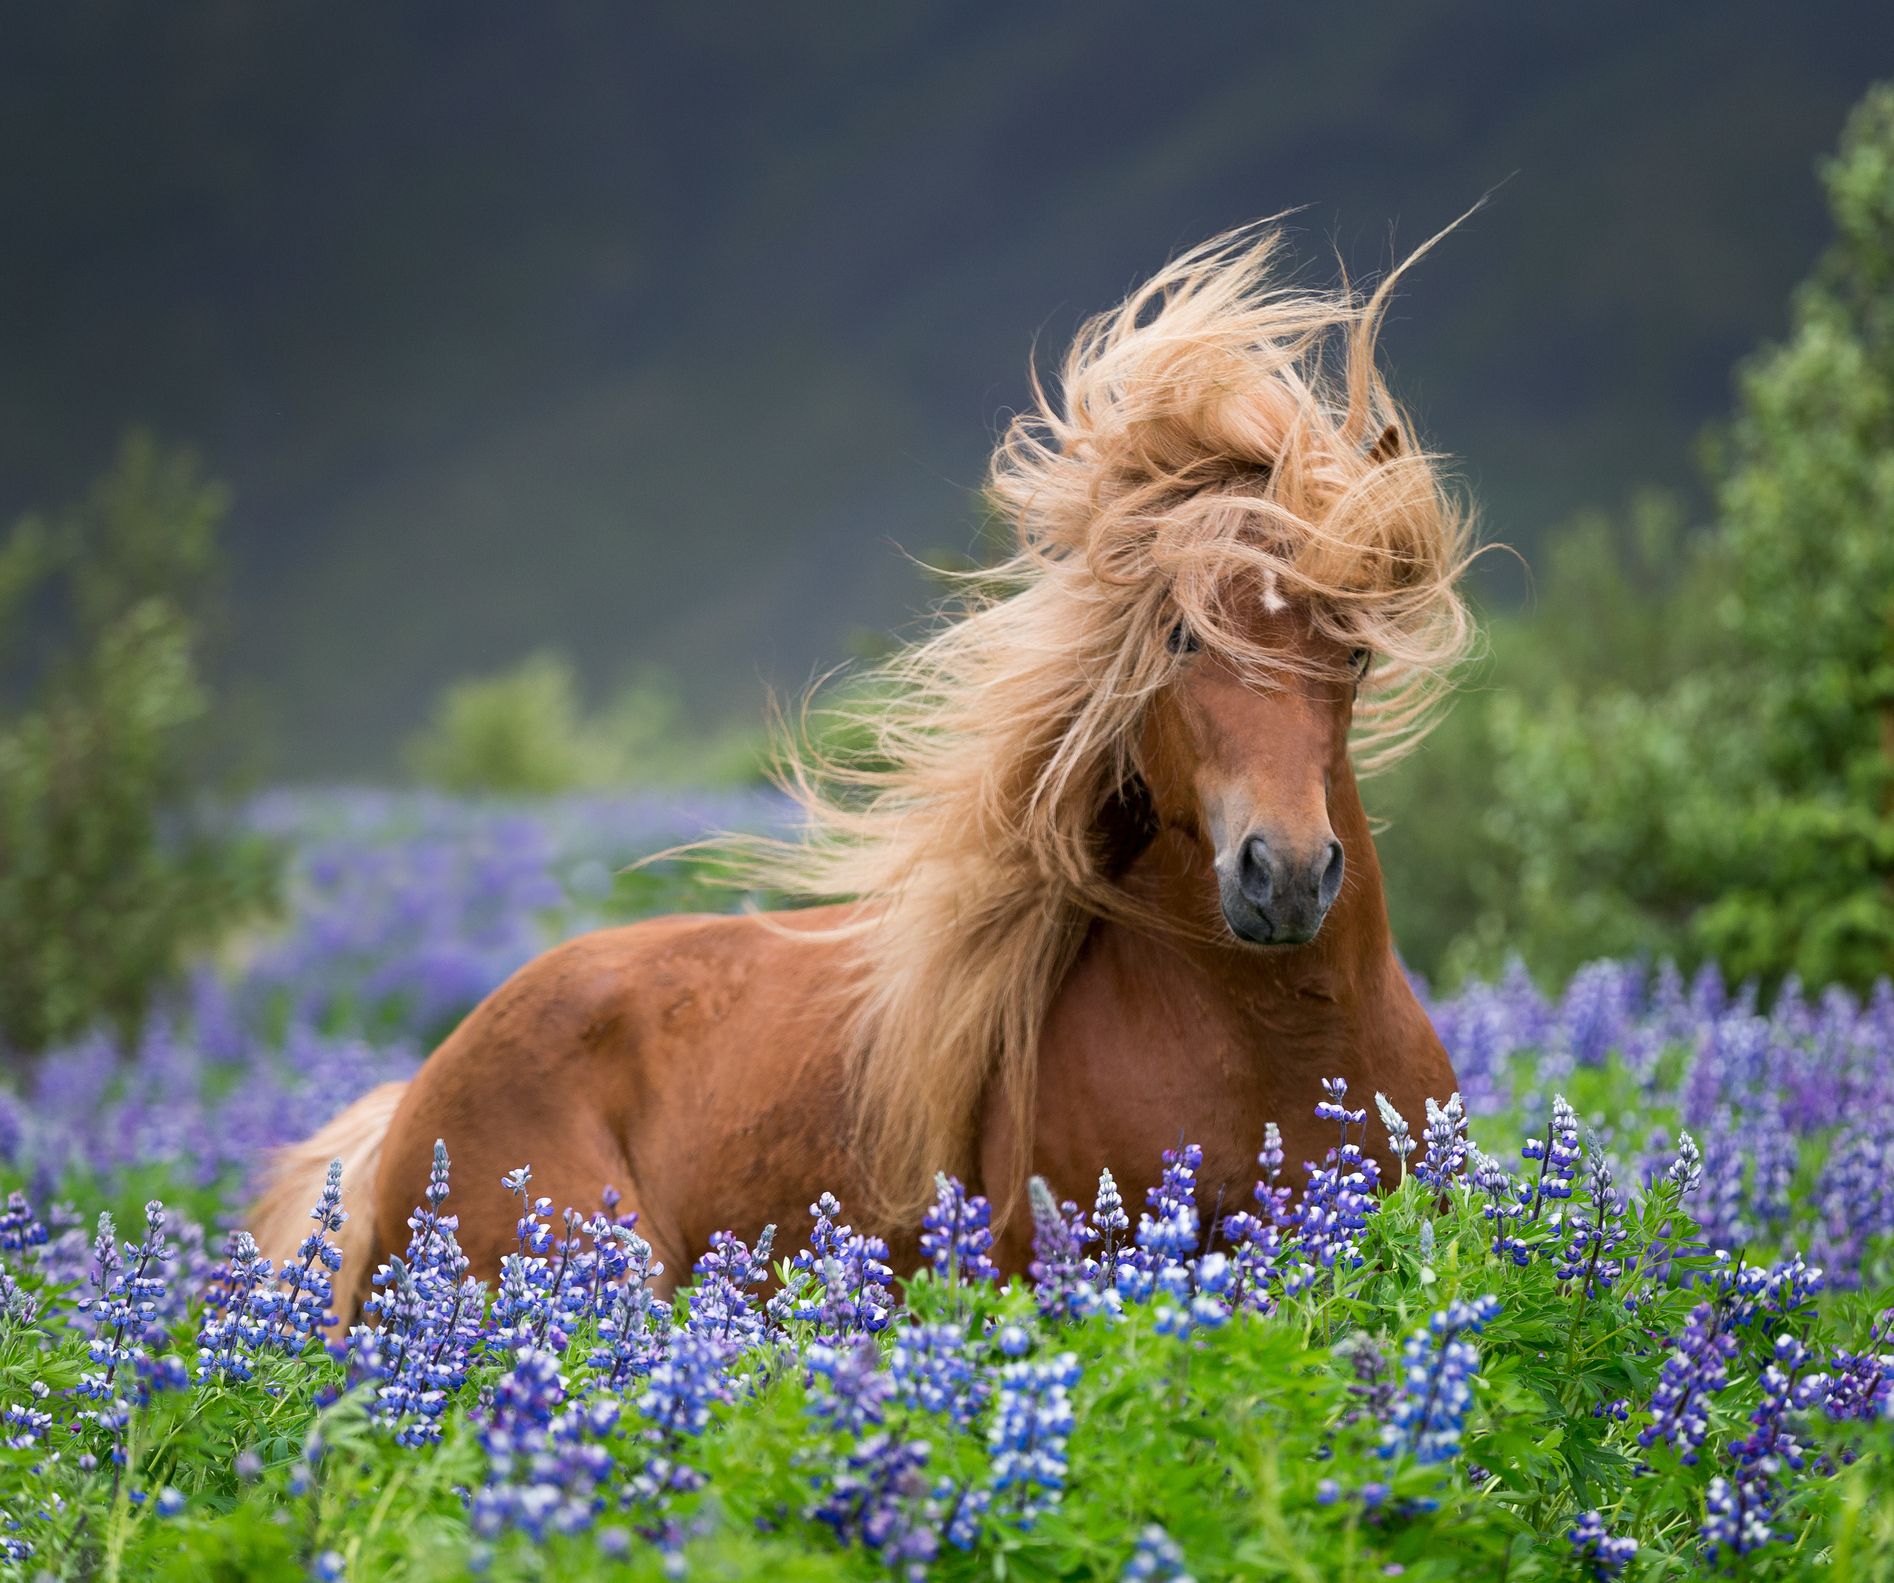 8 Horses With Beautiful Hair - Country Living